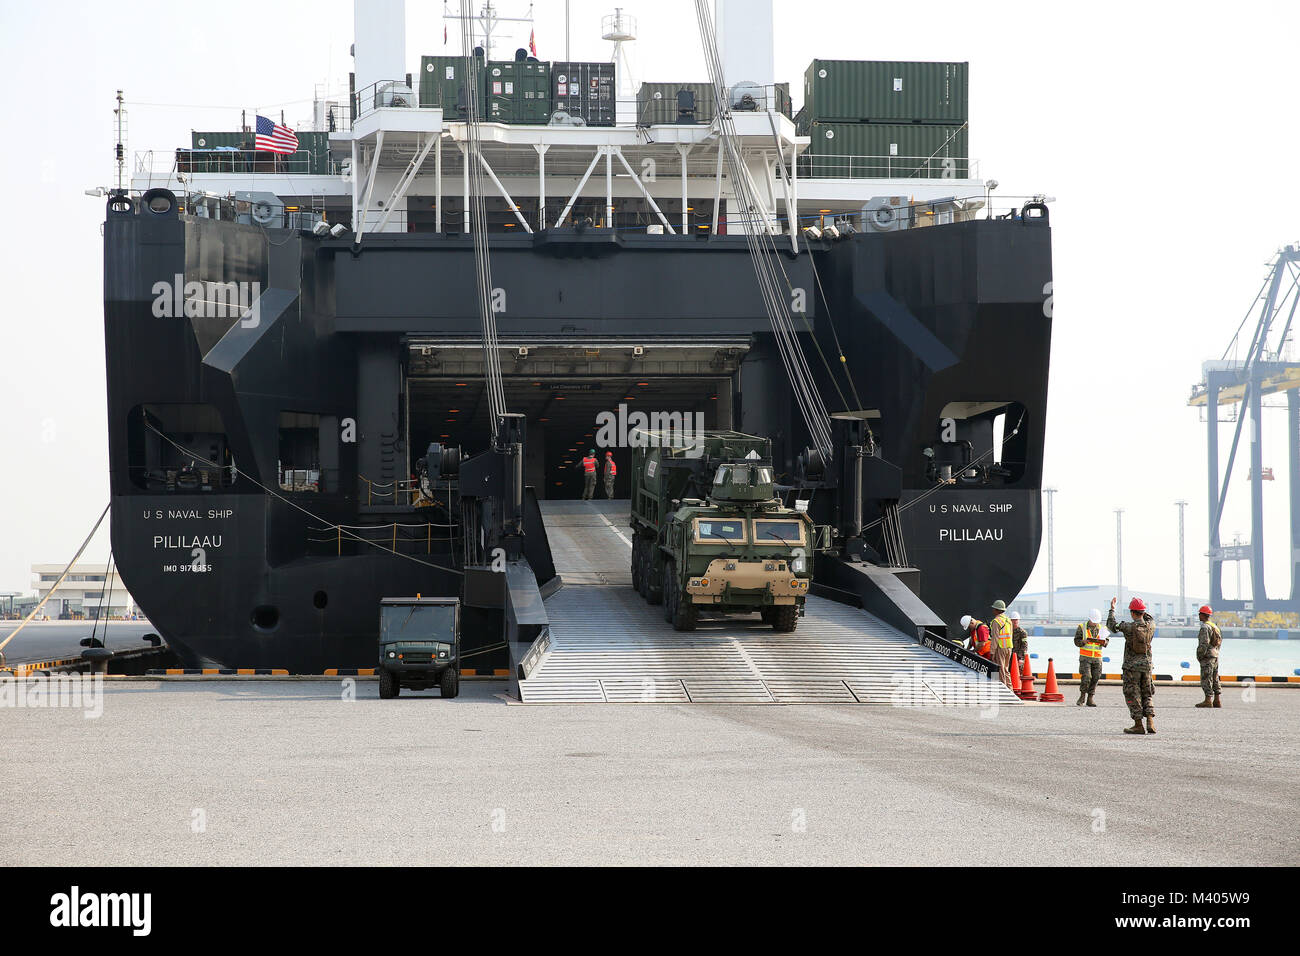 180206-N-IX266-006 LAEM CHABANG, Thailand— A military vehicle rolls off the ramp of Military Sealift Command’s (MSC) large, medium-speed, roll-on/roll-off ship USNS Pililaau (T-AK 304) during an offload at the port here to deliver equipment in support of Cobra Gold 2018, Feb. 5. The USNS Pililaau is part of Maritime Prepositioning Ships Squadron THREE, which consists of a fleet of government-owned ships operated by MSC and is based in the Guam-Saipan area of the Western Pacific Ocean. CG18 is a Thailand and United States co-sponsored exercise conducted annually in the Kingdom of Thailand. (U.S Stock Photo